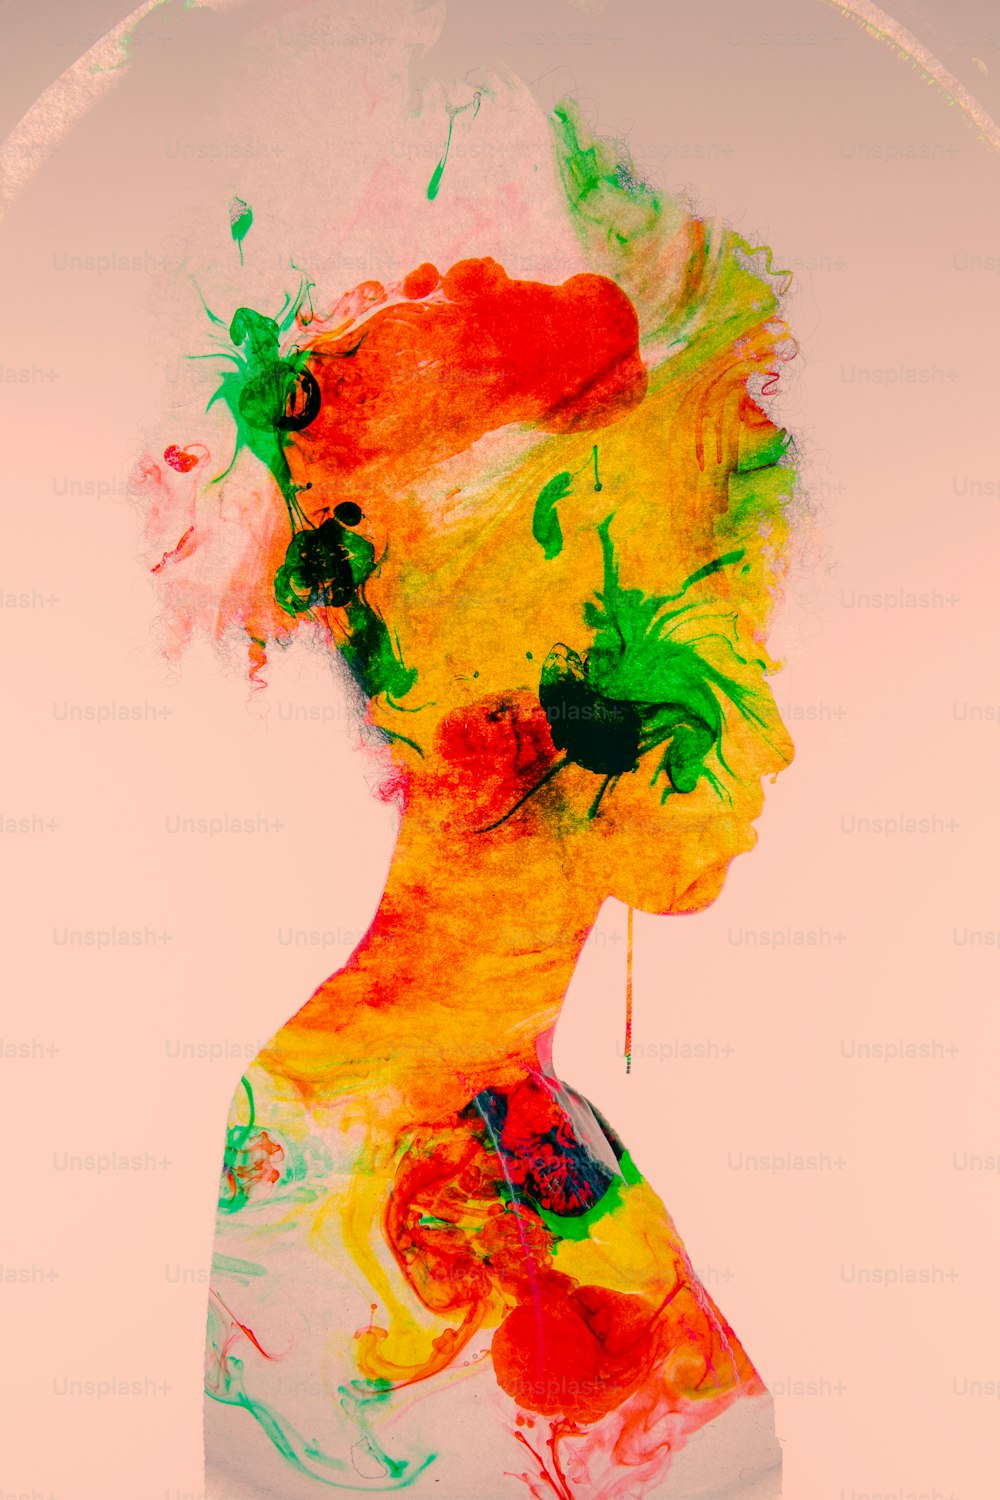 a painting of a woman's head with colorful hair